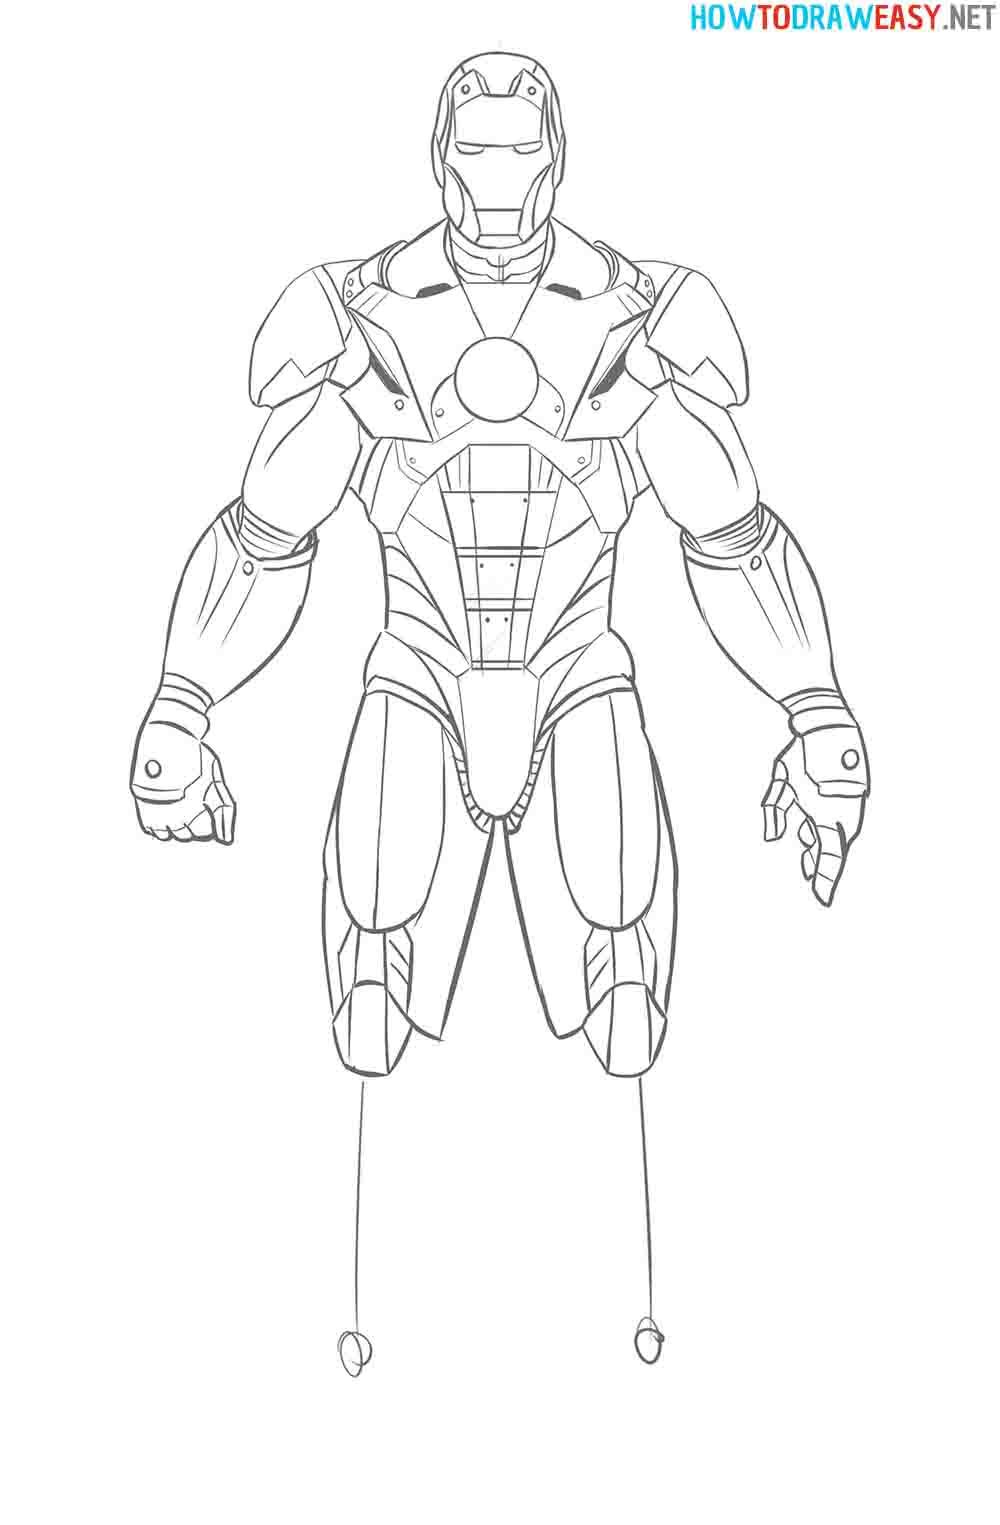 How to Draw Iron Man   How to Draw Easy